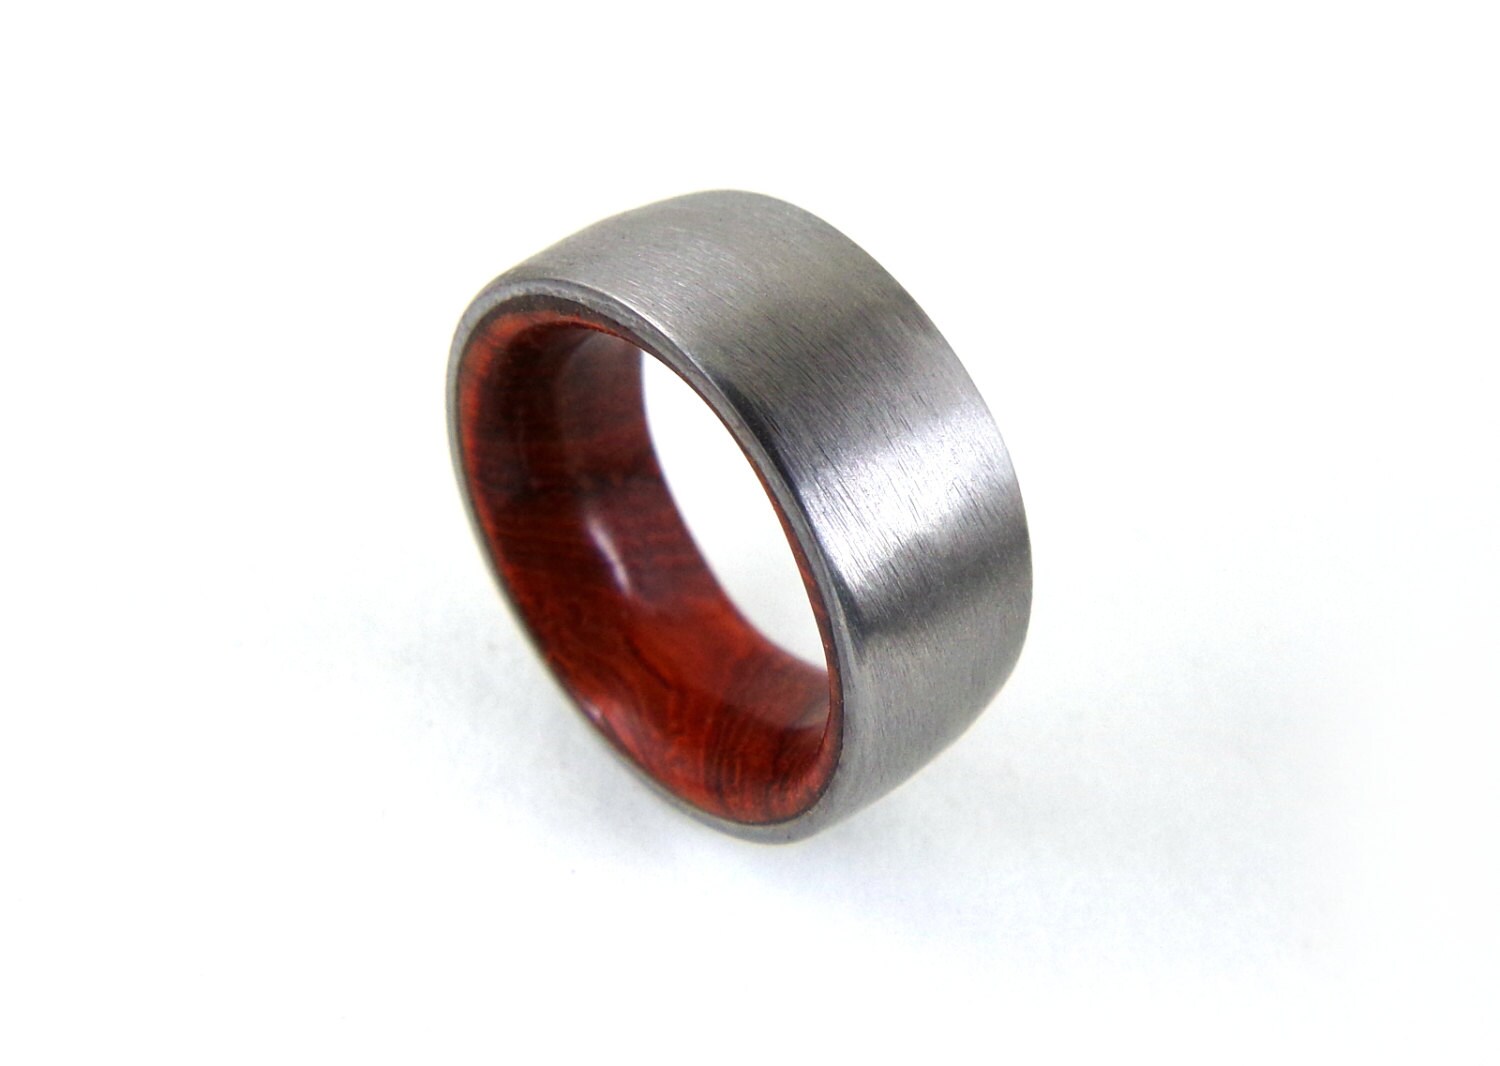 Wood Wedding Ring Wedding Ring Wood and Metal Ring Wood and